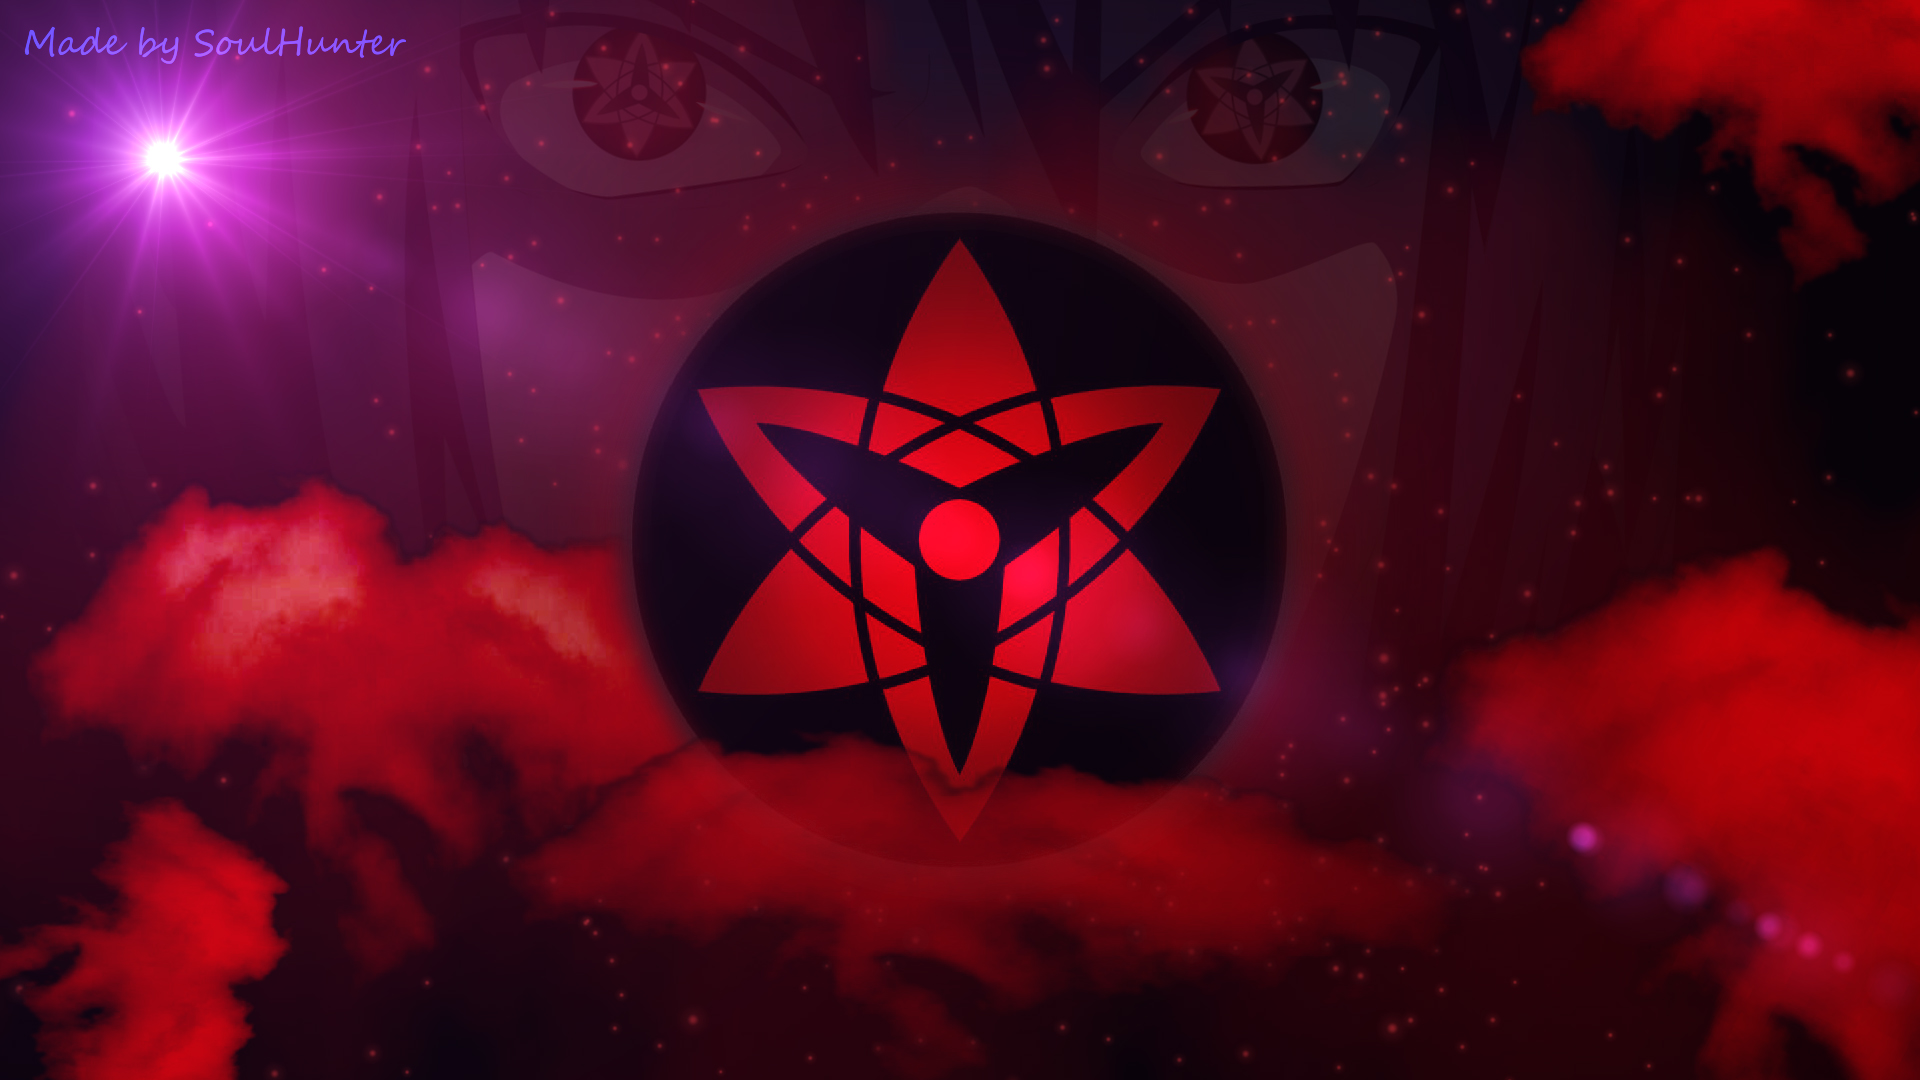 sharingan wallpaper hd,red,graphic design,graphics,space,fictional character